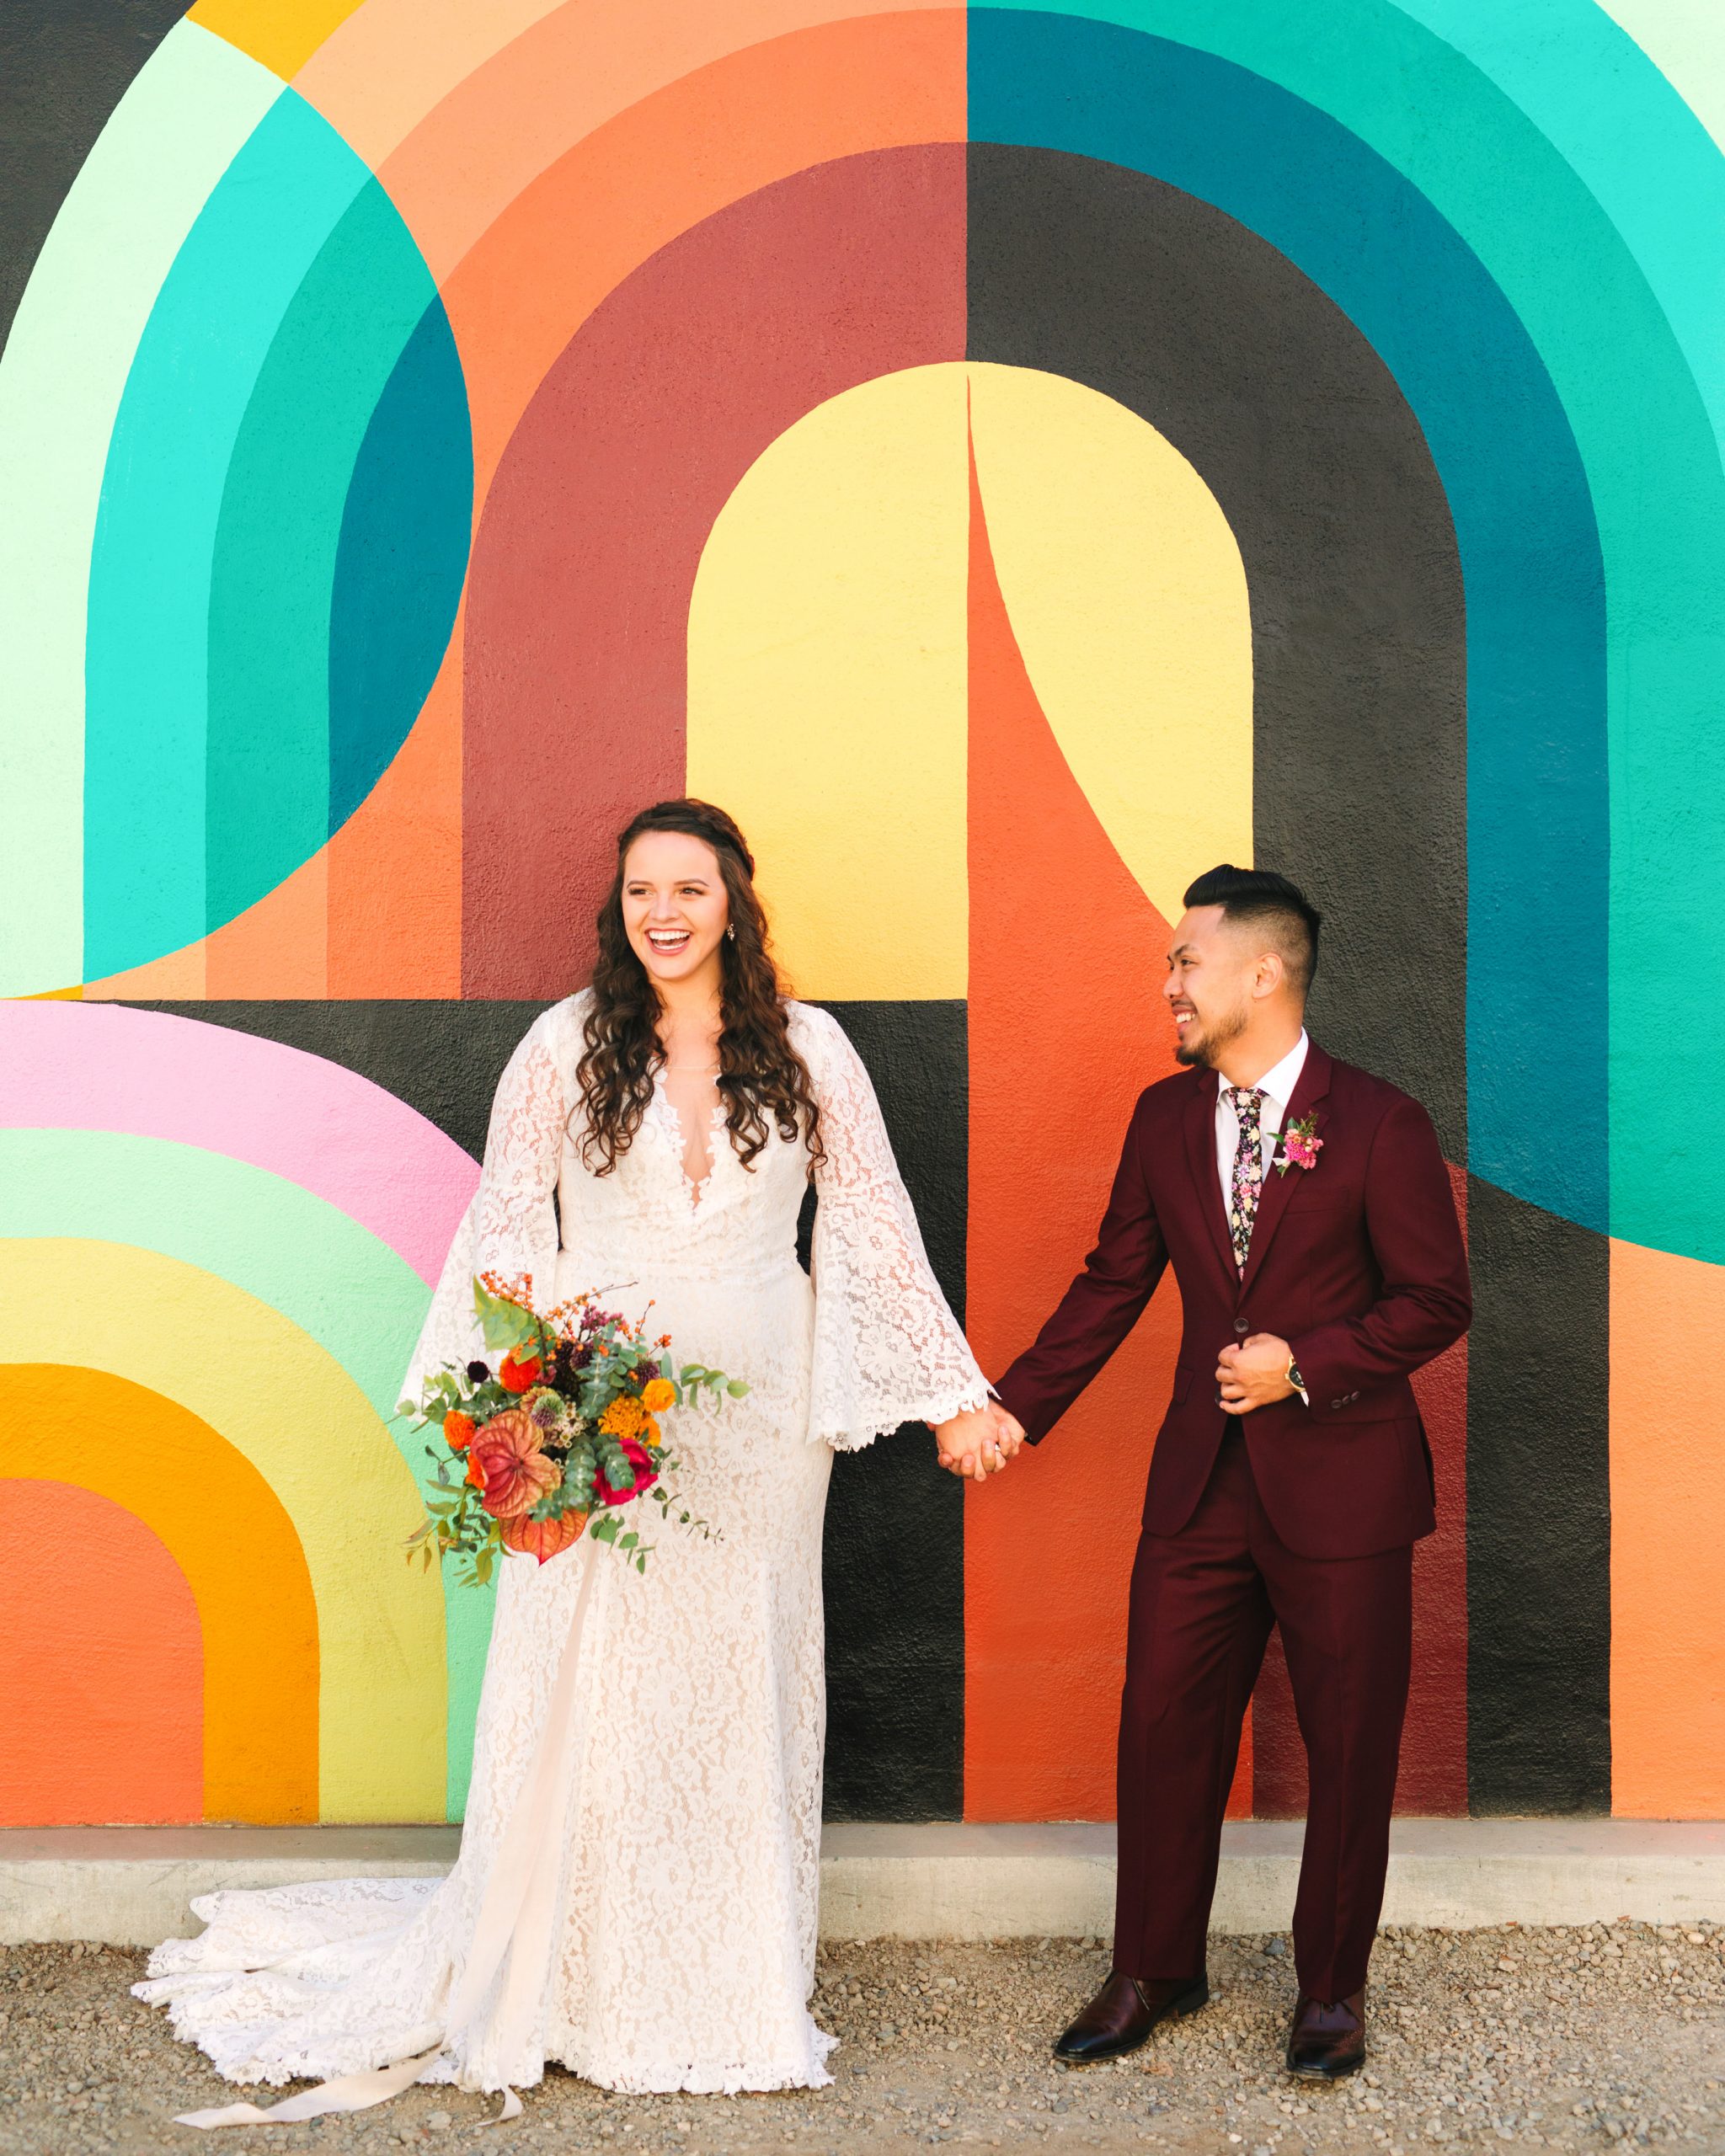 Bride and groom in front of colorful mural